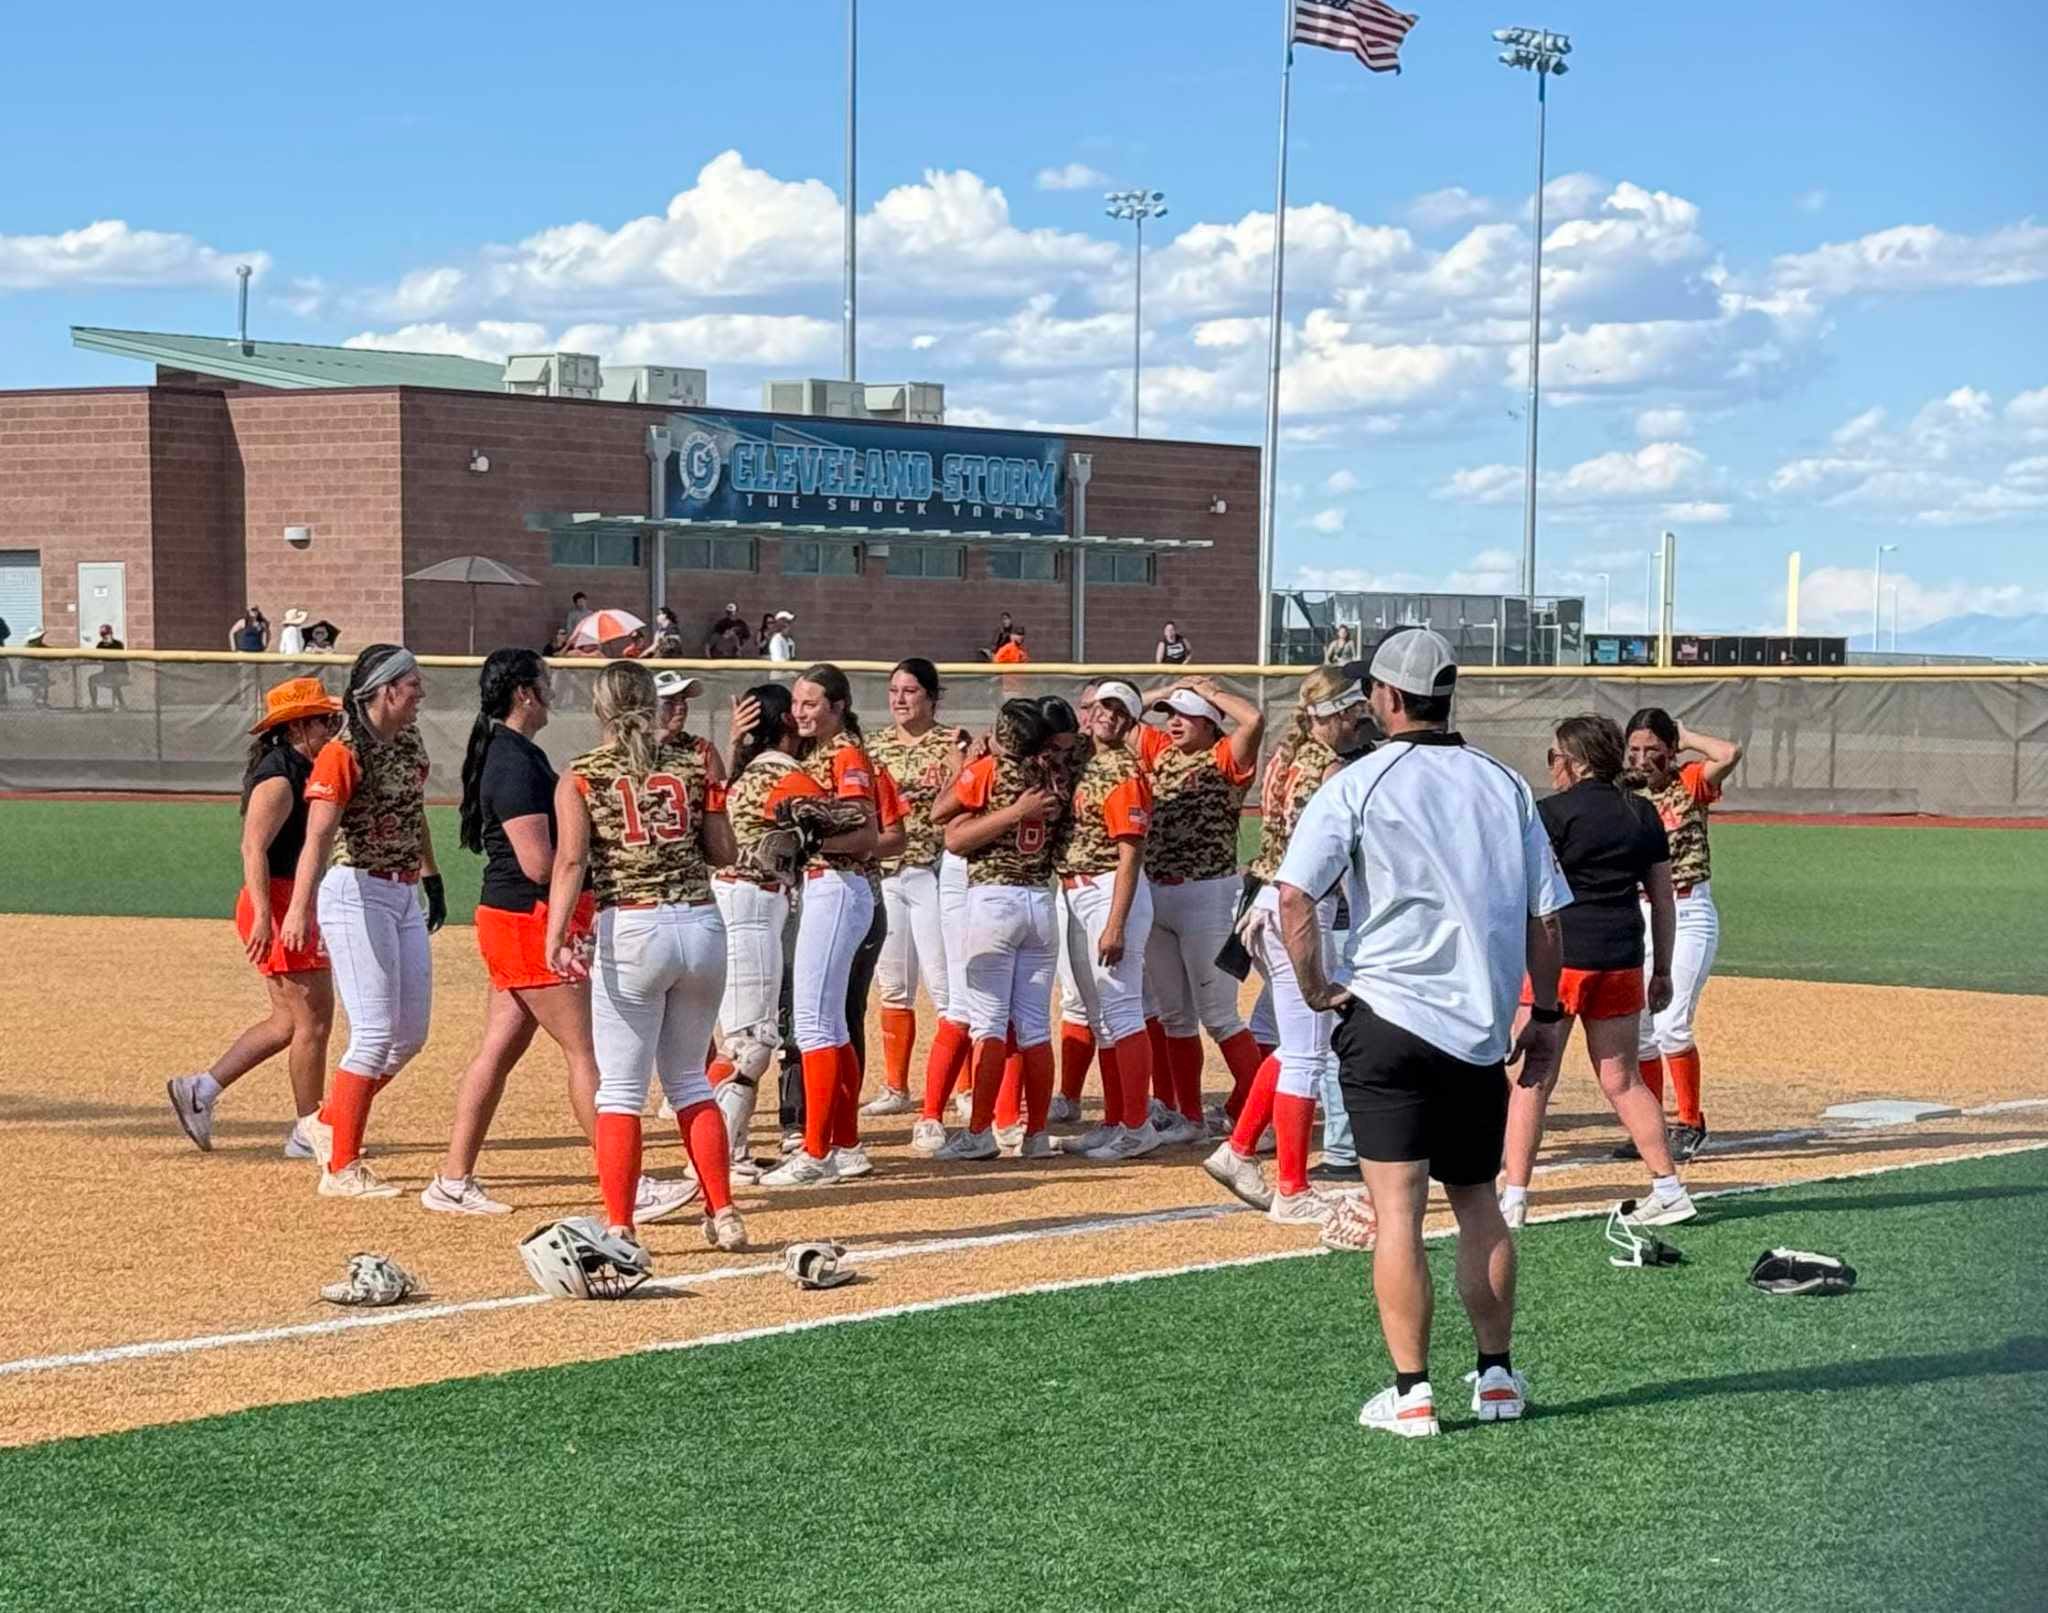 Playoff update: Loving softball wins small school title, Artesia plays for state titles